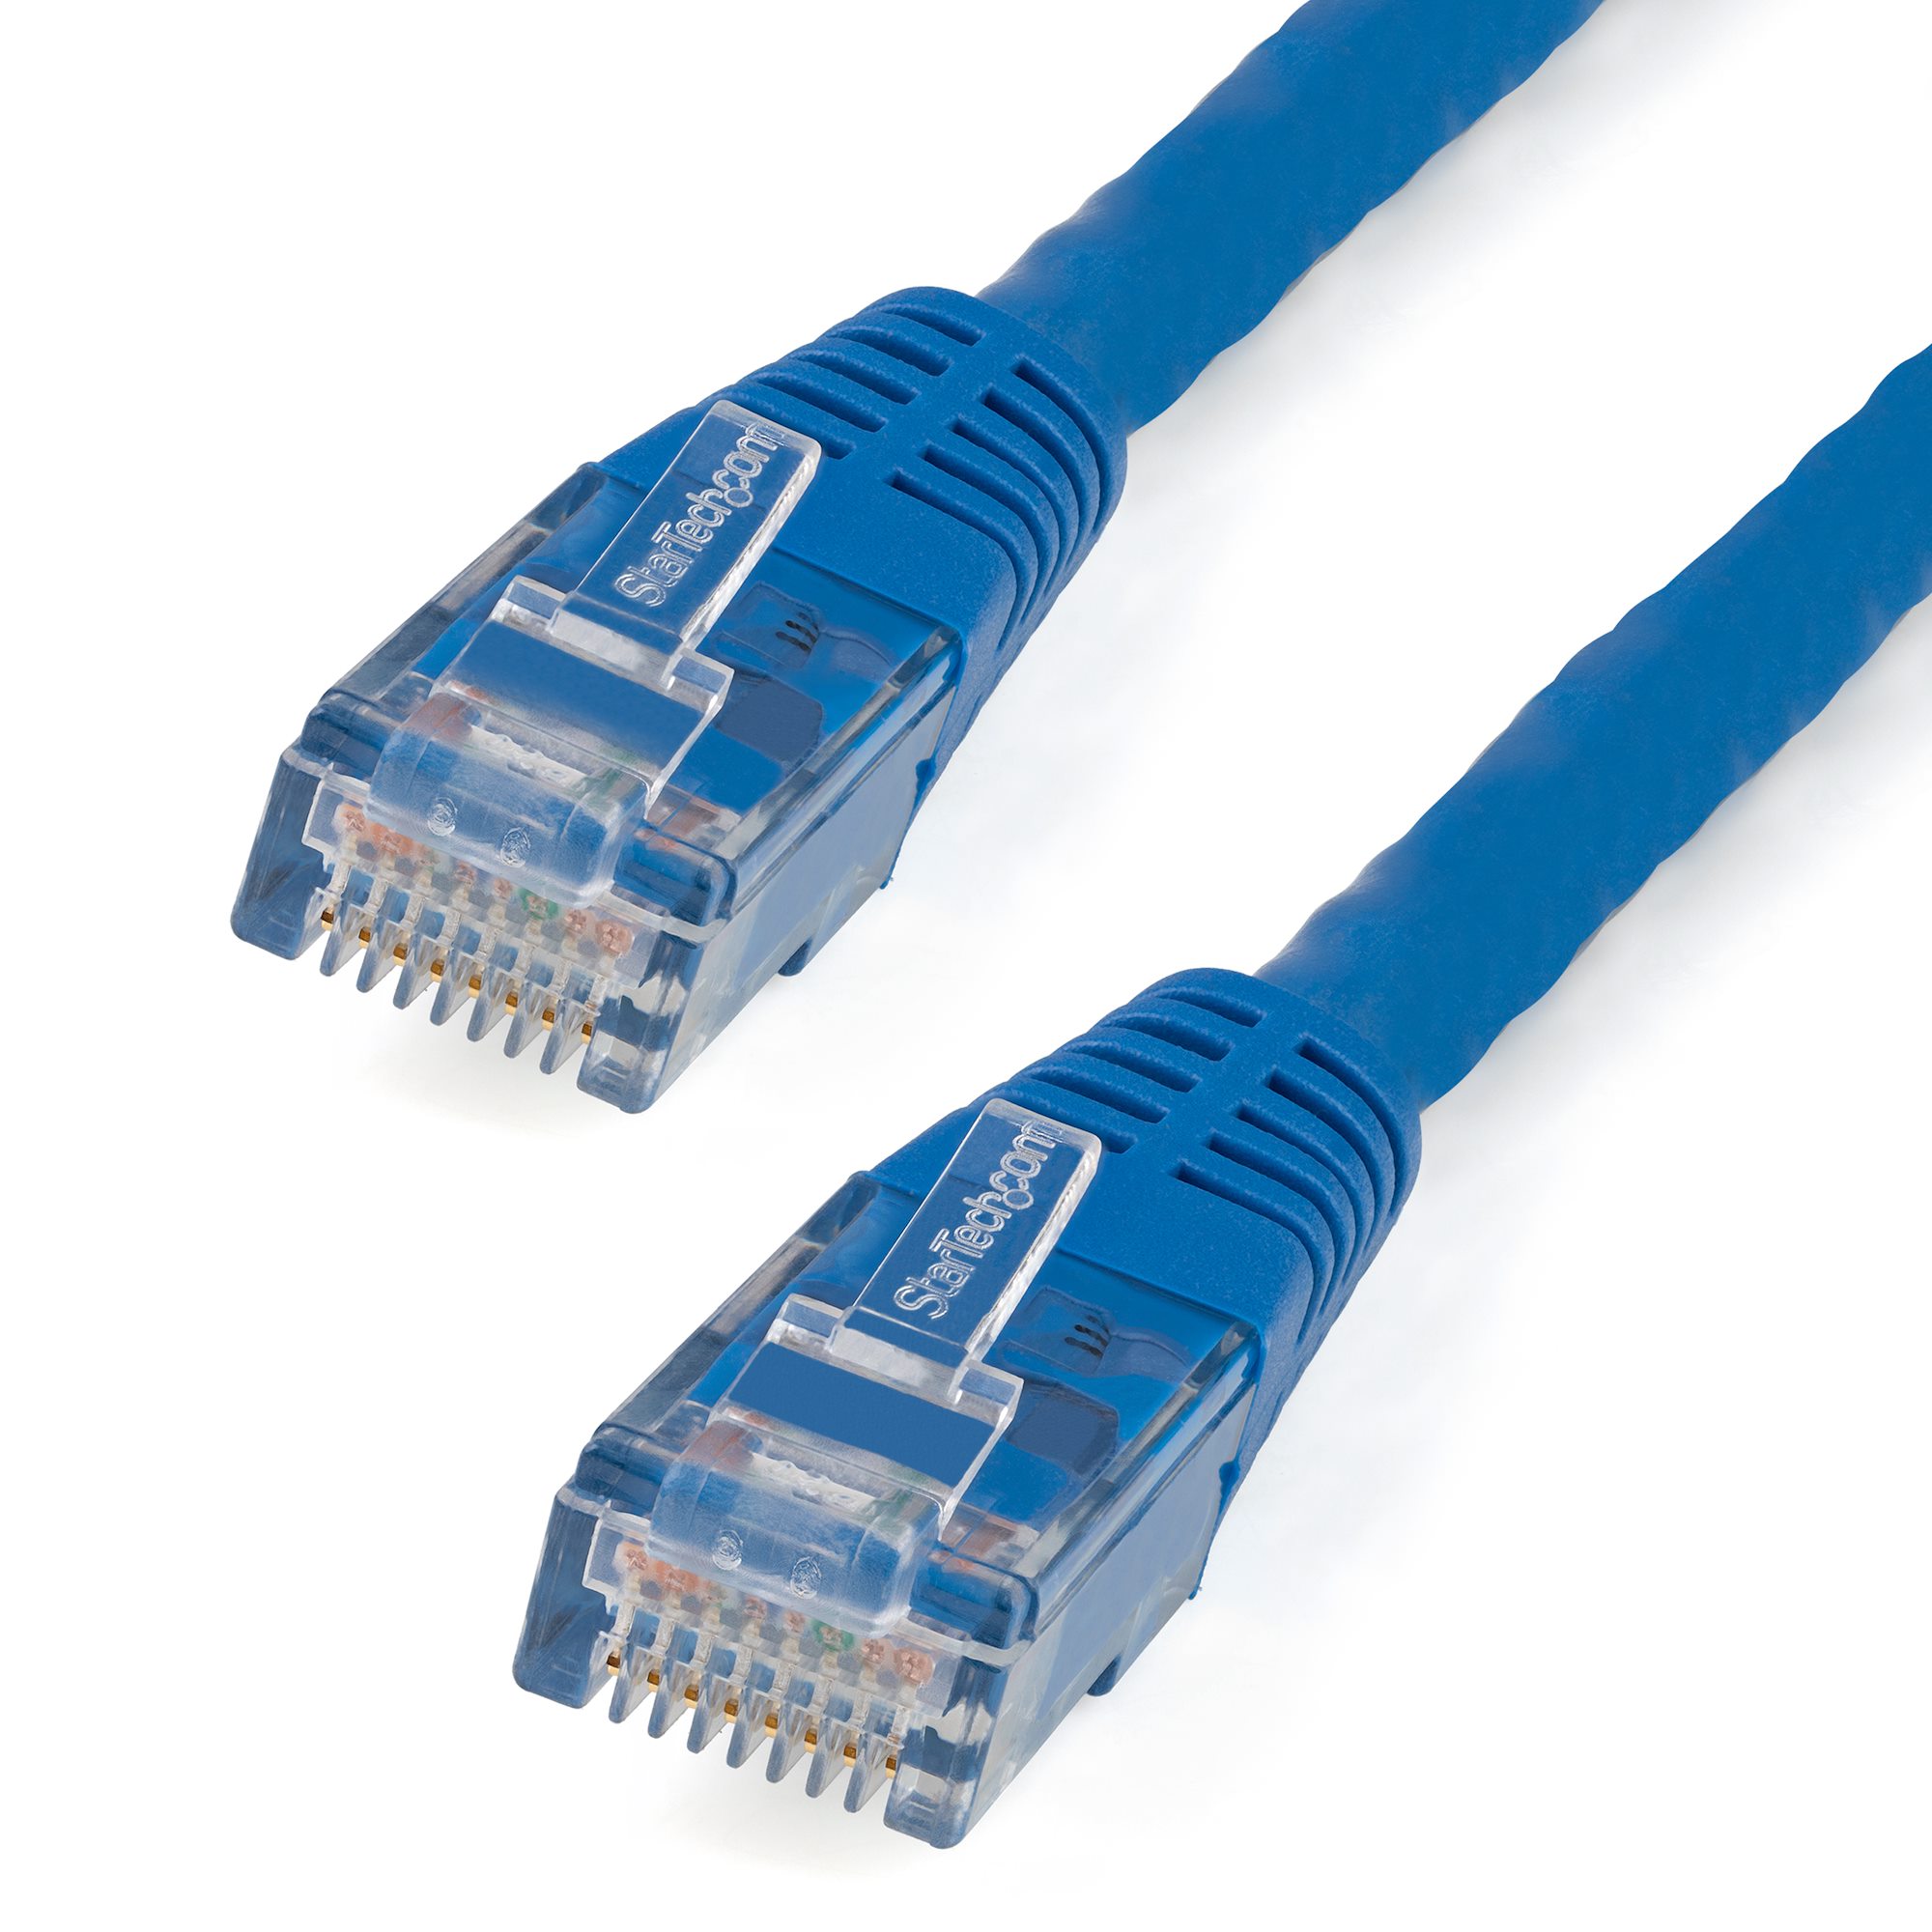 CAT5E ETHERNET PATCH CABLE 5FT BLUE CATEGORY 5E ROUTER CORD 5' SNAGLESS RJ45 GIG 